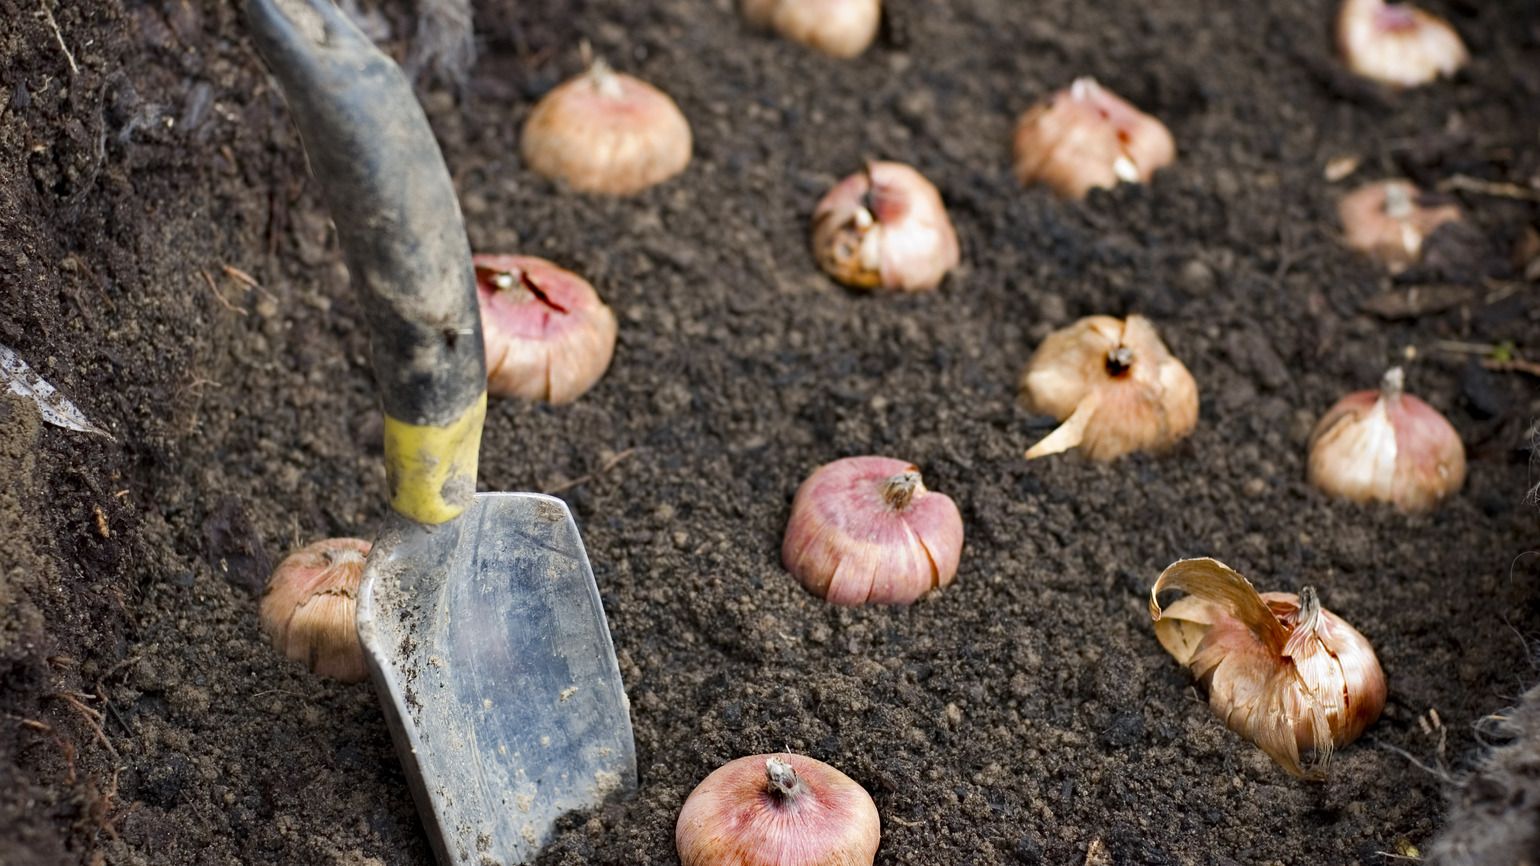 Flower bulbs being planted in good soil (Getty)